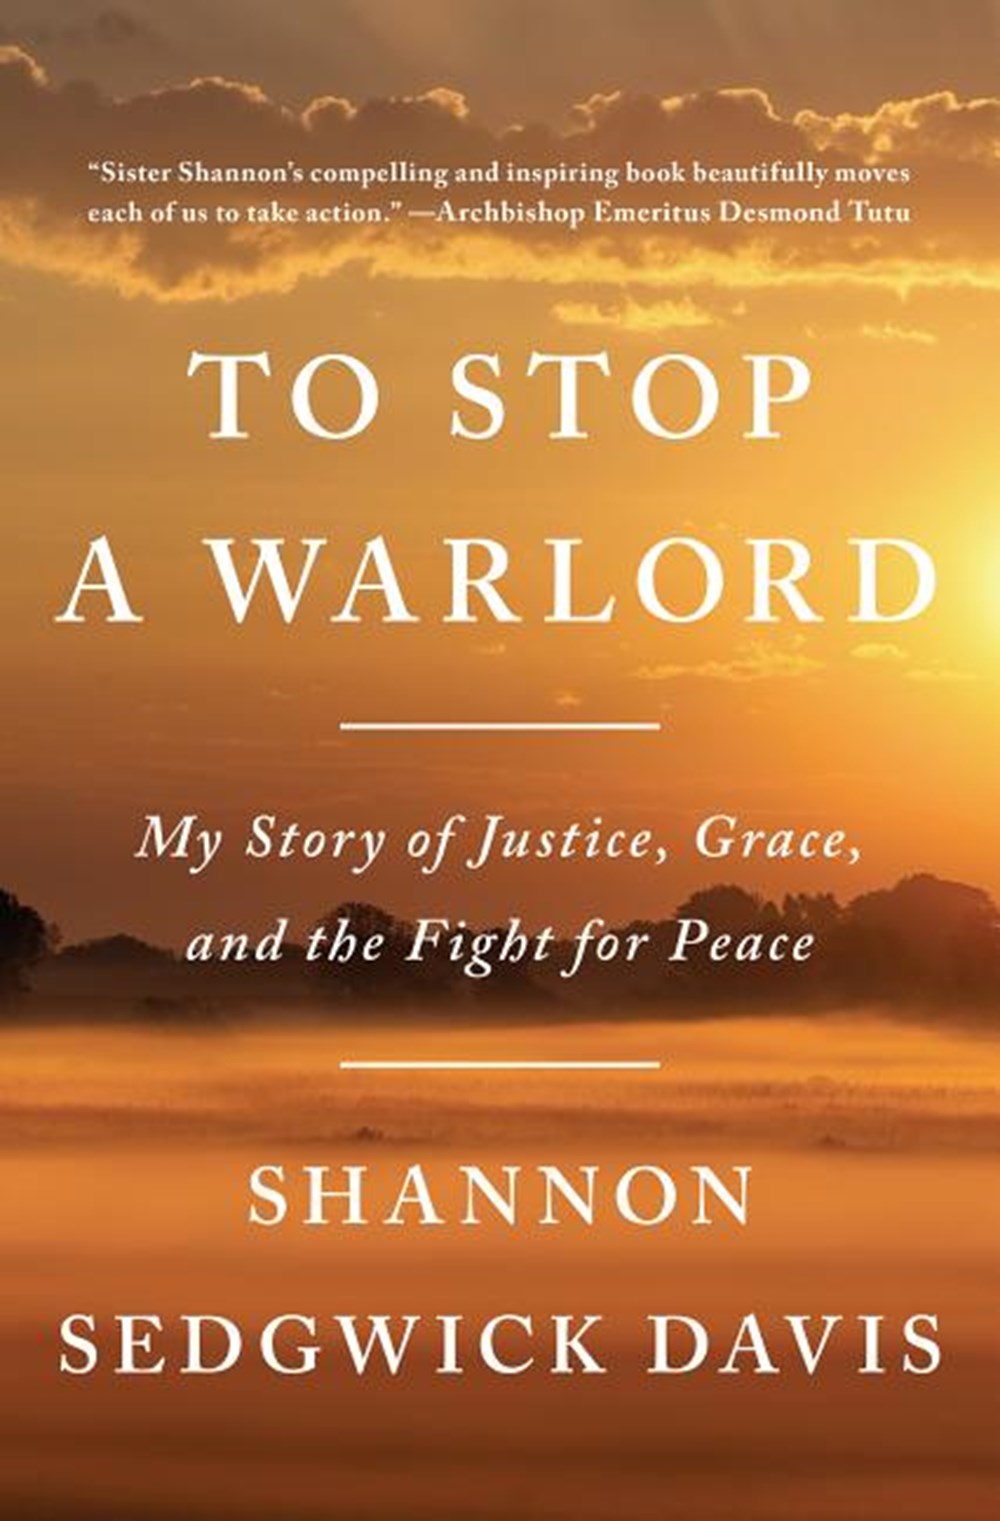 To Stop a Warlord My Story of Justice, Grace, and the Fight for Peace